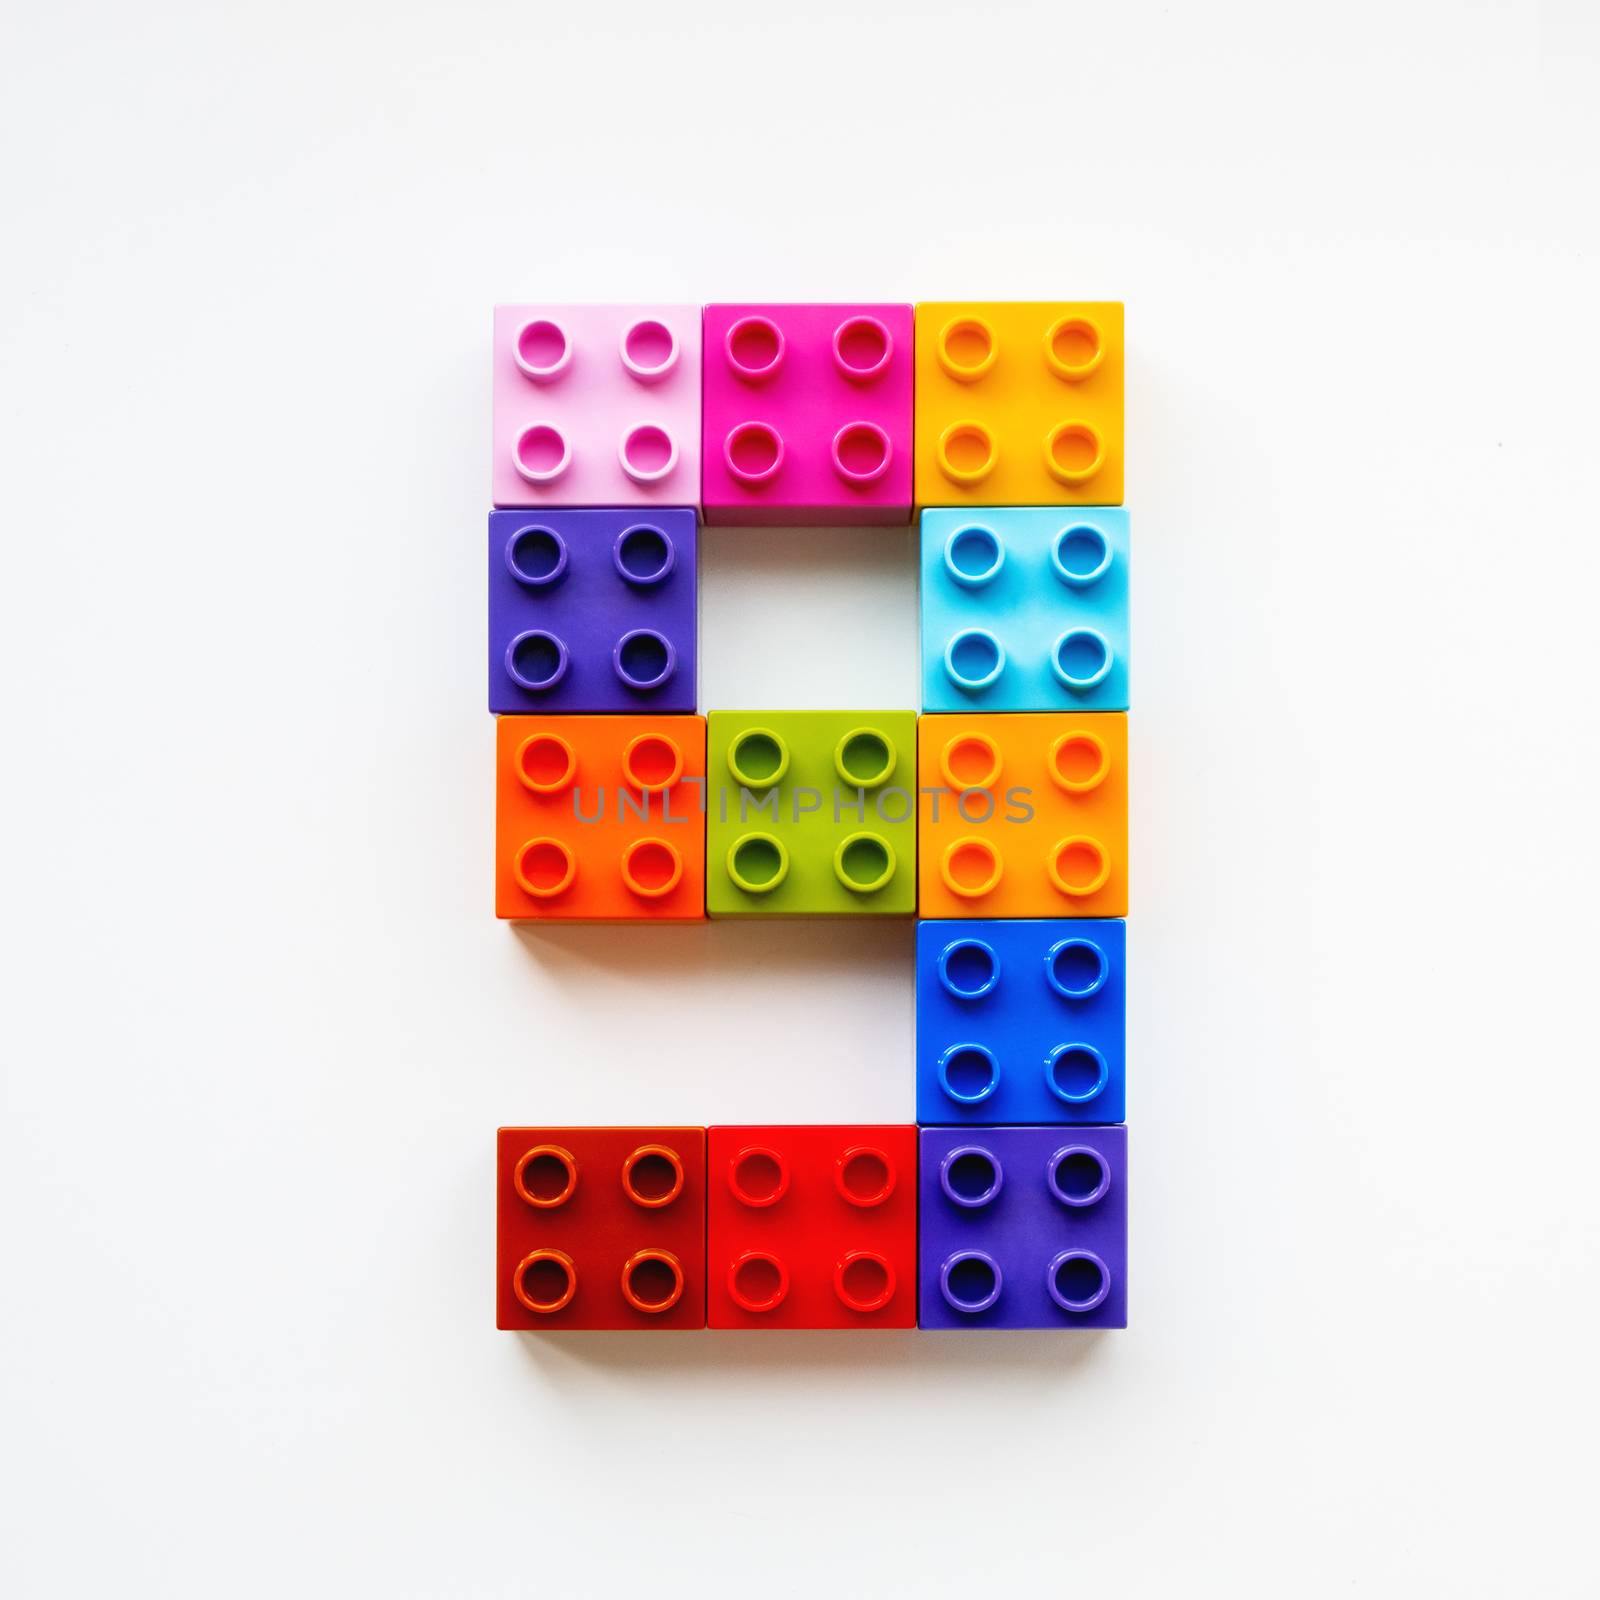 Number Nine made of colorful constructor blocks. Toy bricks lying in order, making number 9. Education process - learning numbers with child using multicolored toy details.